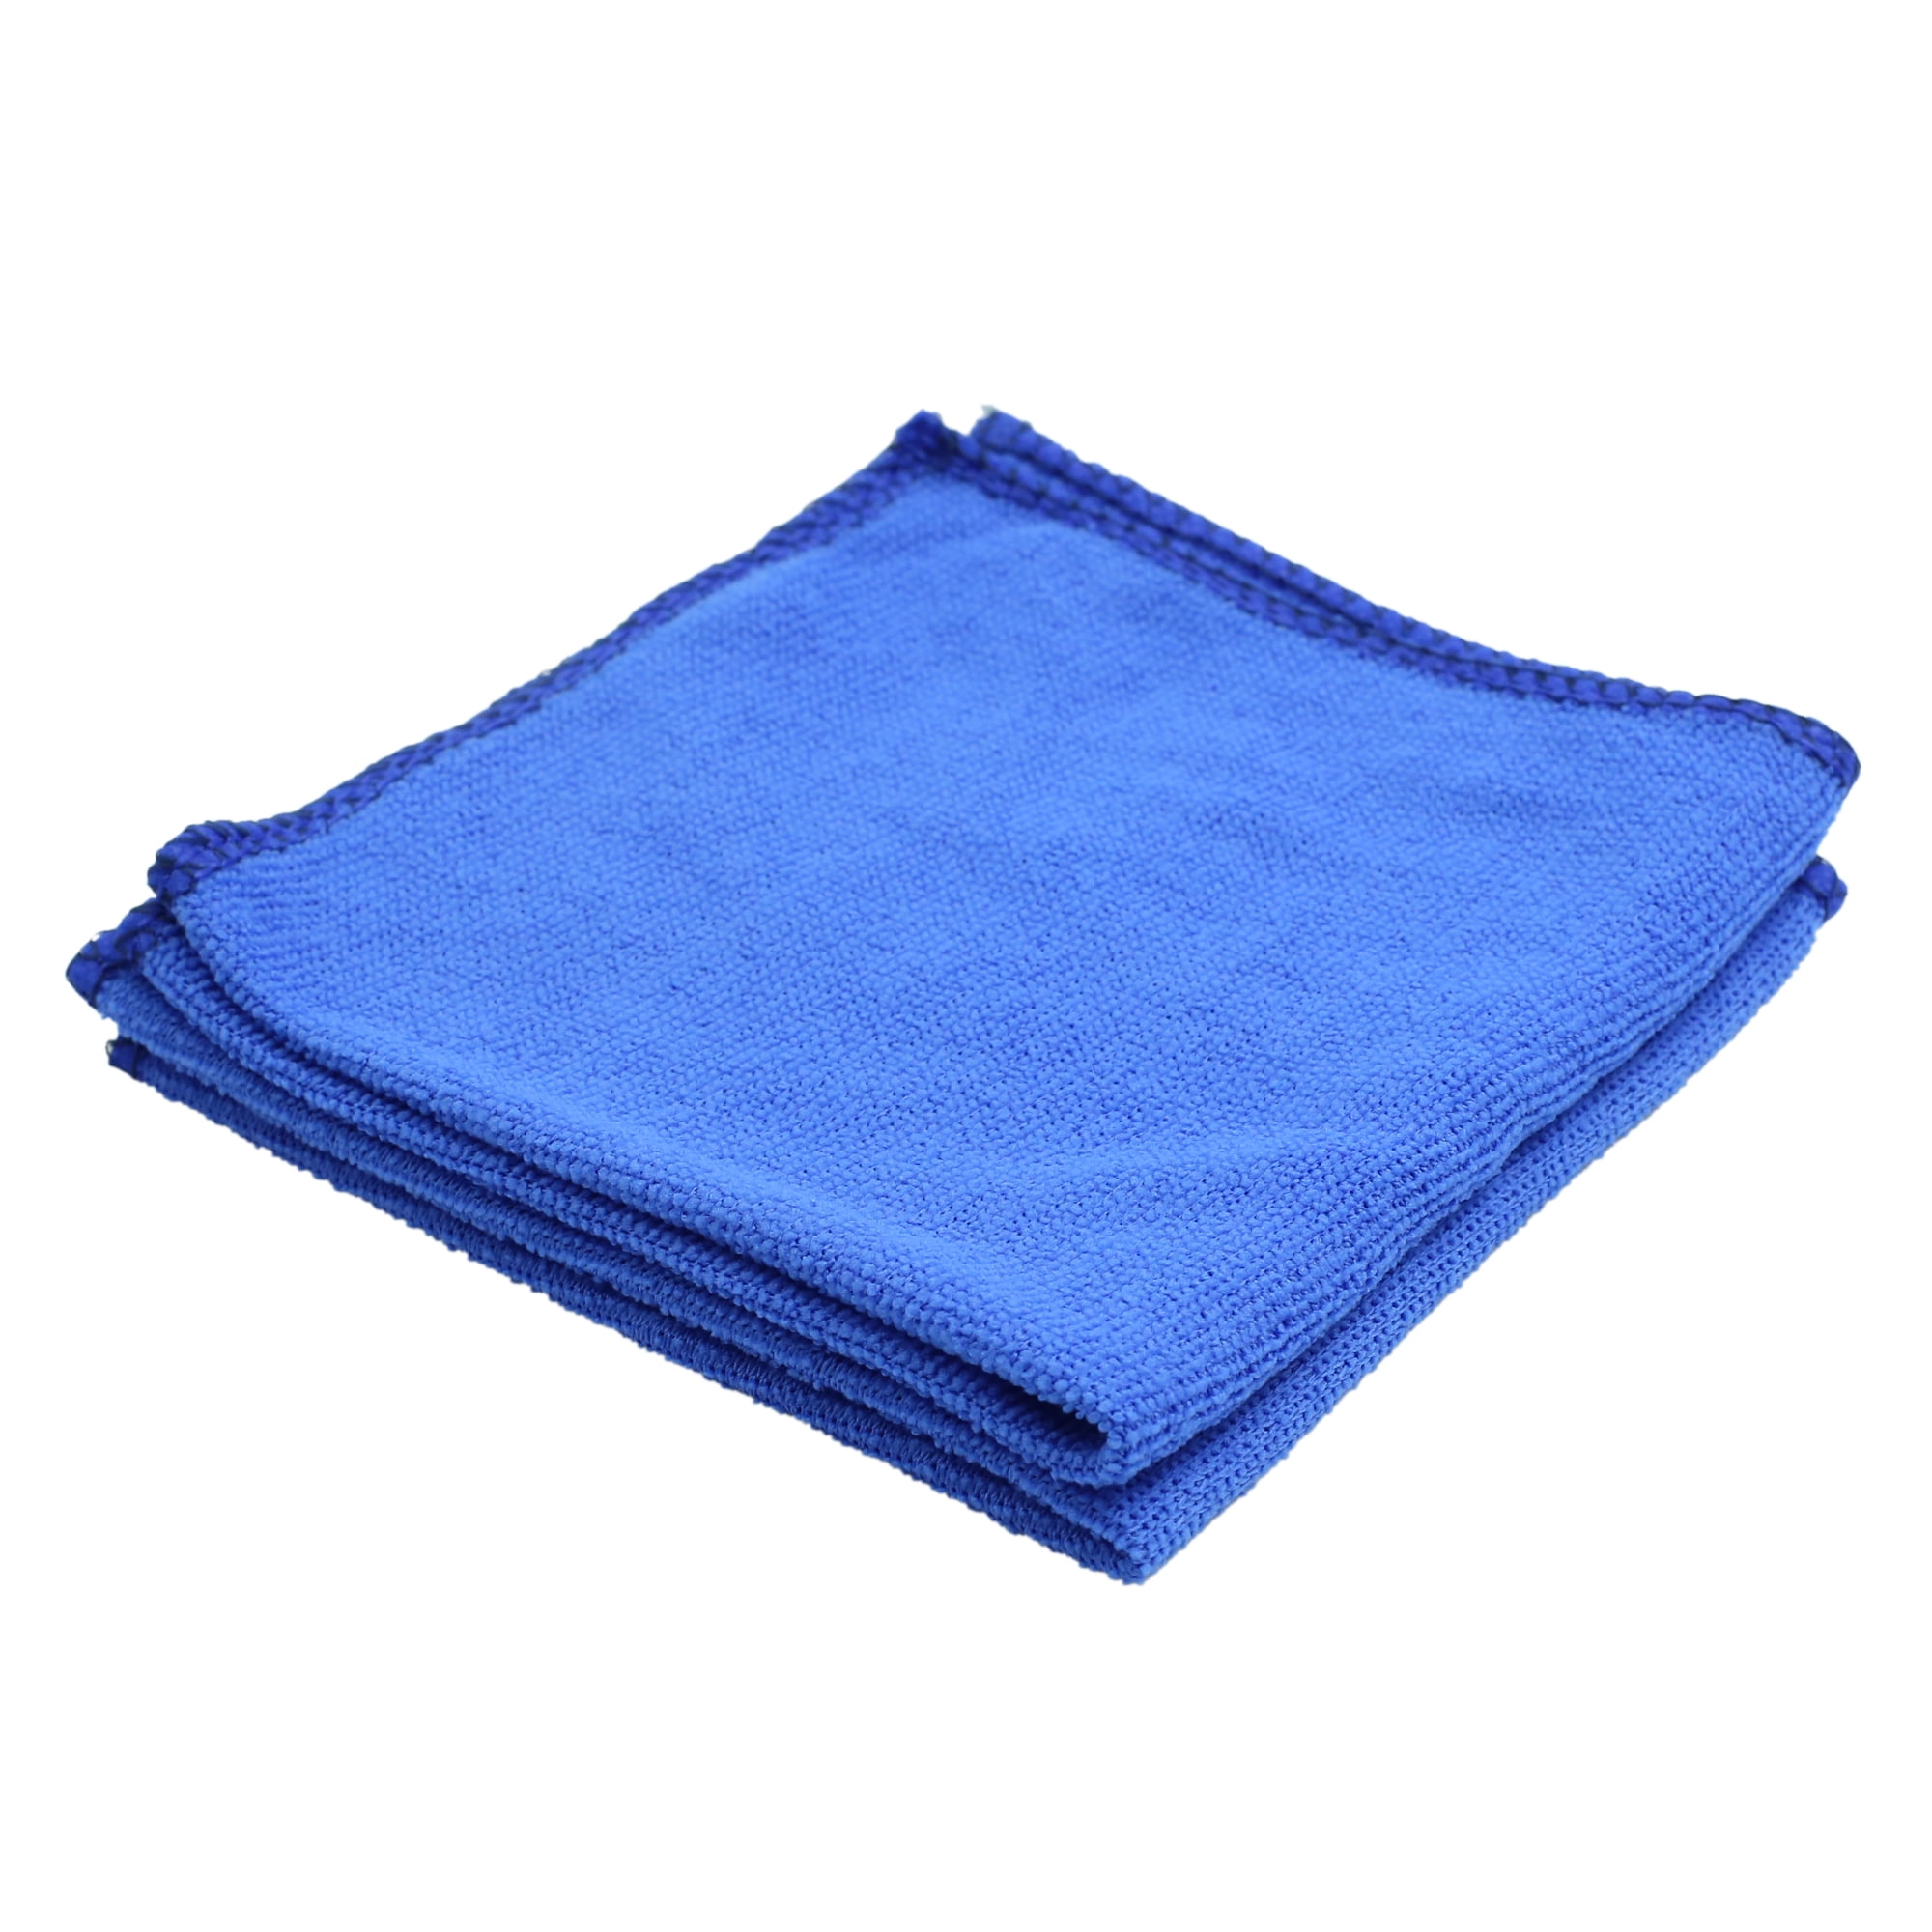 Water Drying Blue Absorbent Polishing Car Cleaning Towel Microfiber Cloth 